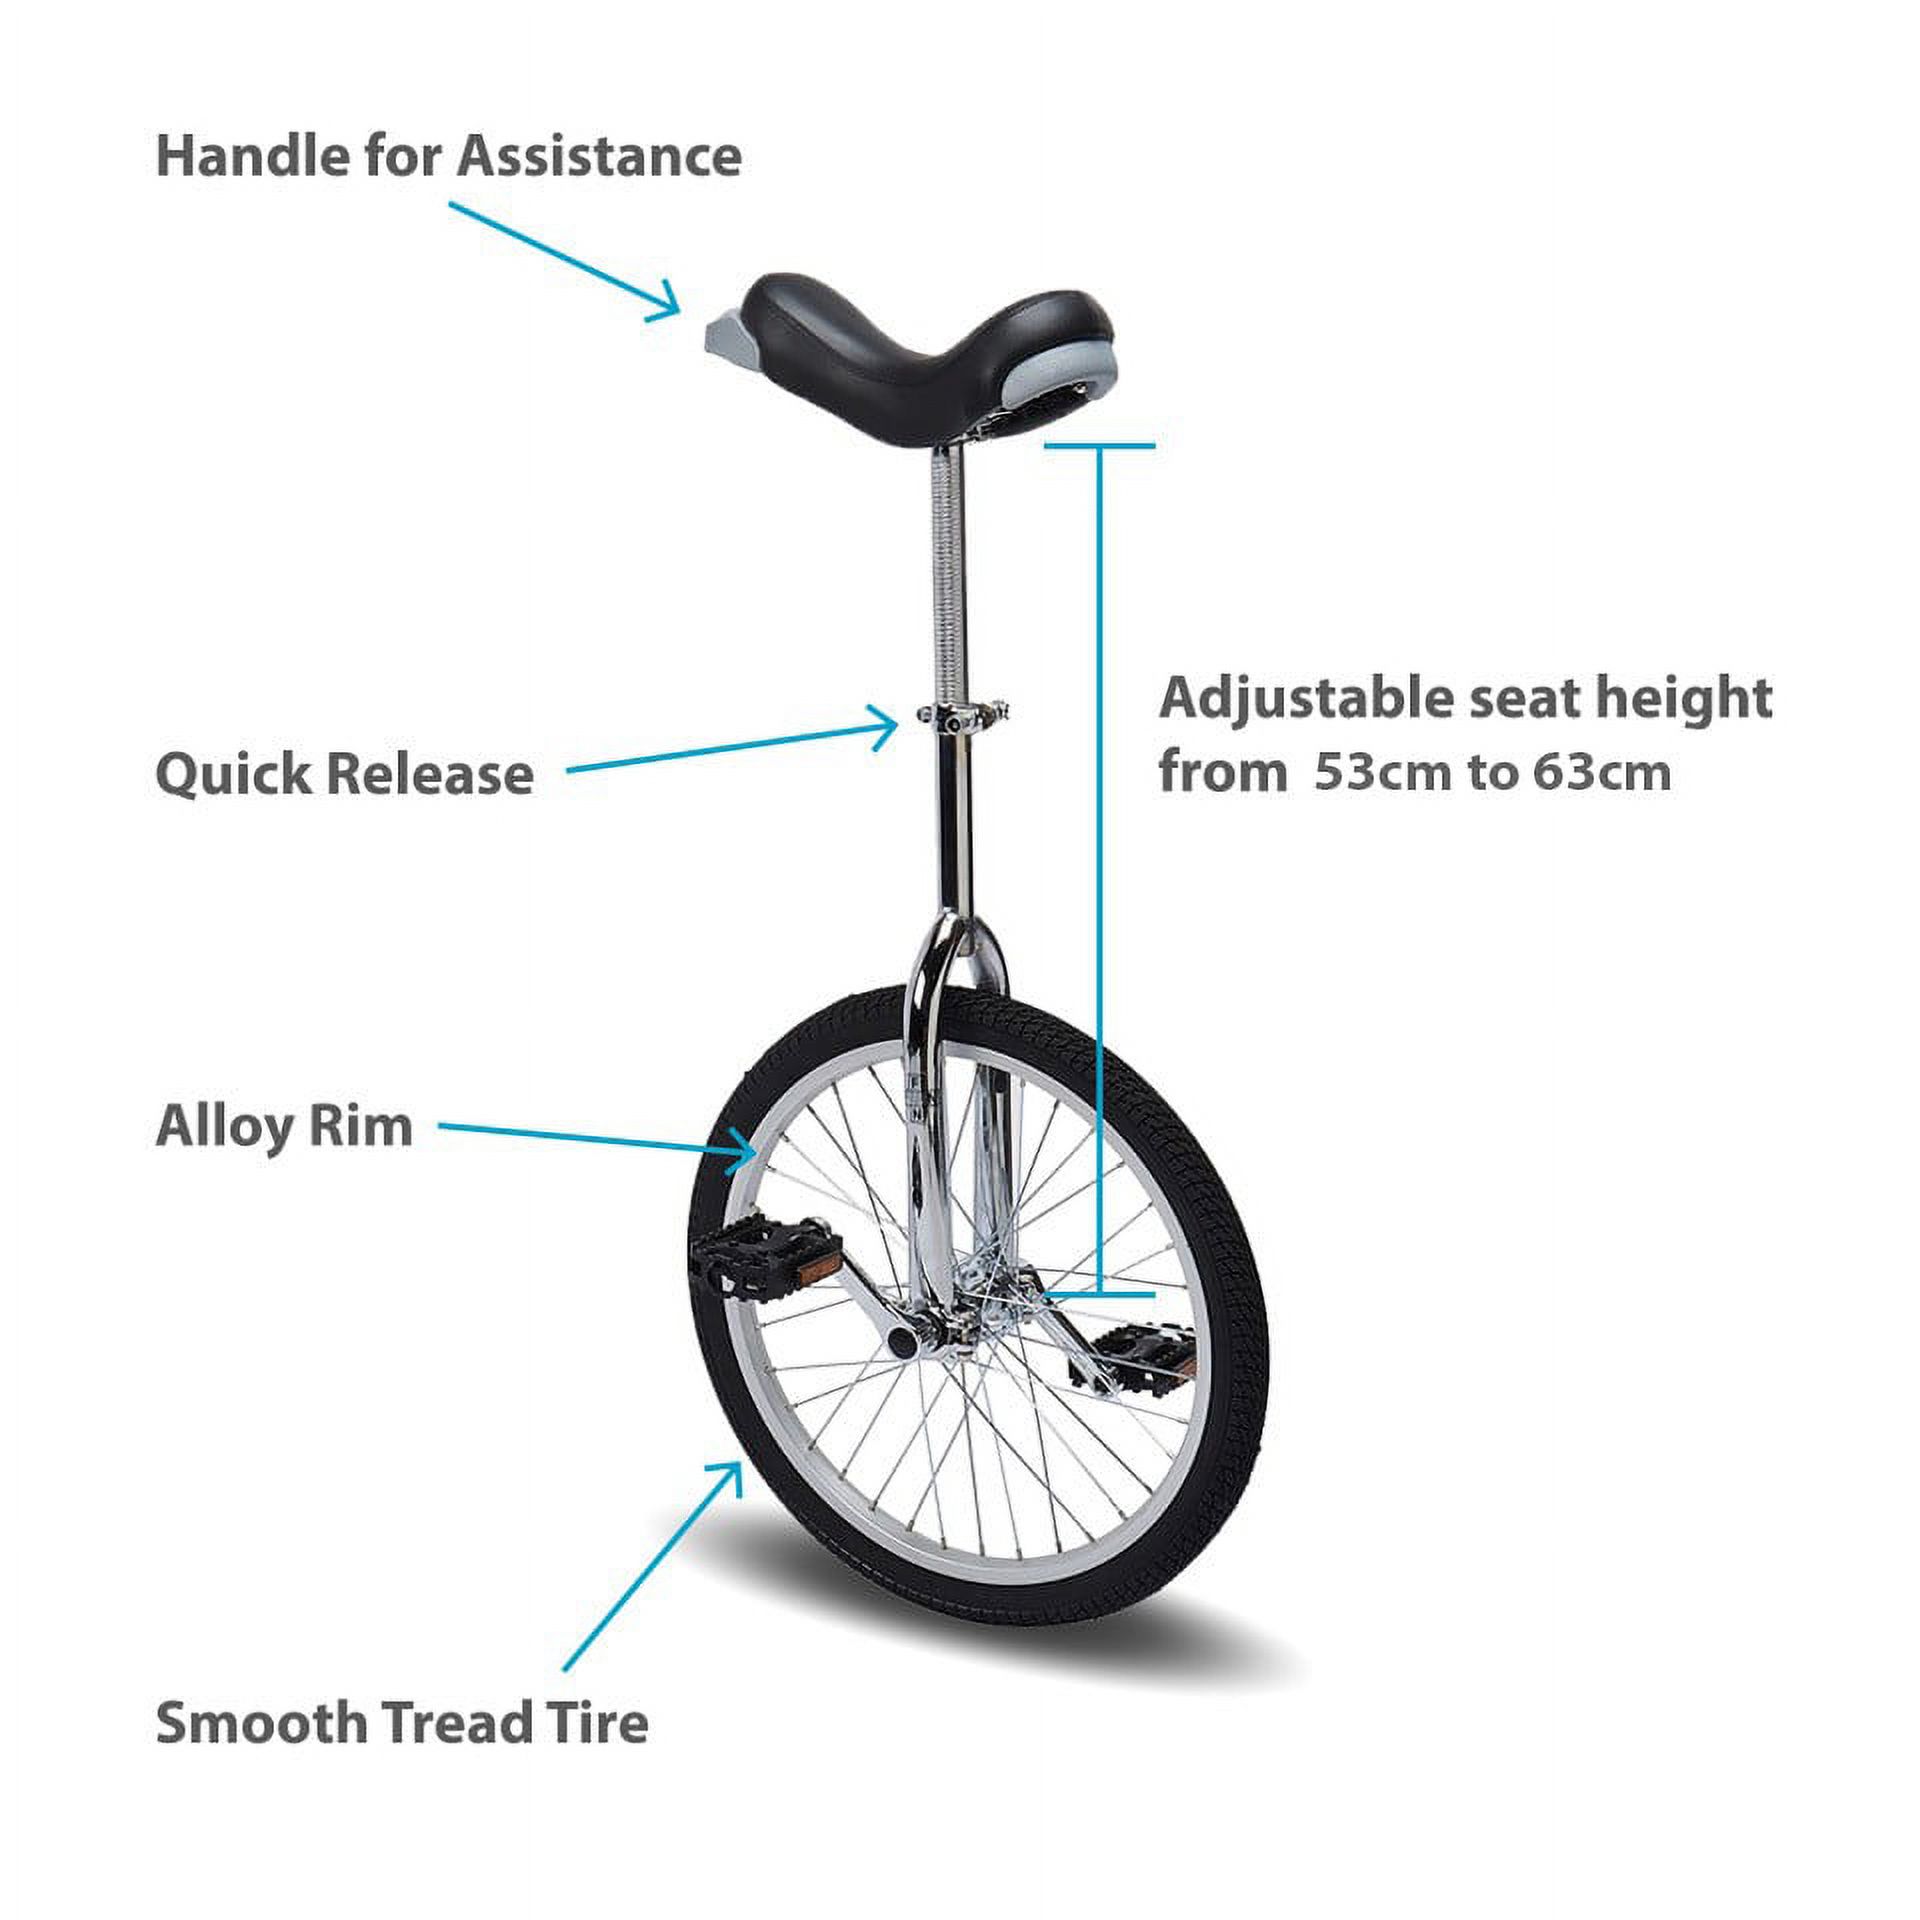 Fun 16 Inch Wheel Chrome Unicycle with Alloy Rim - image 3 of 3